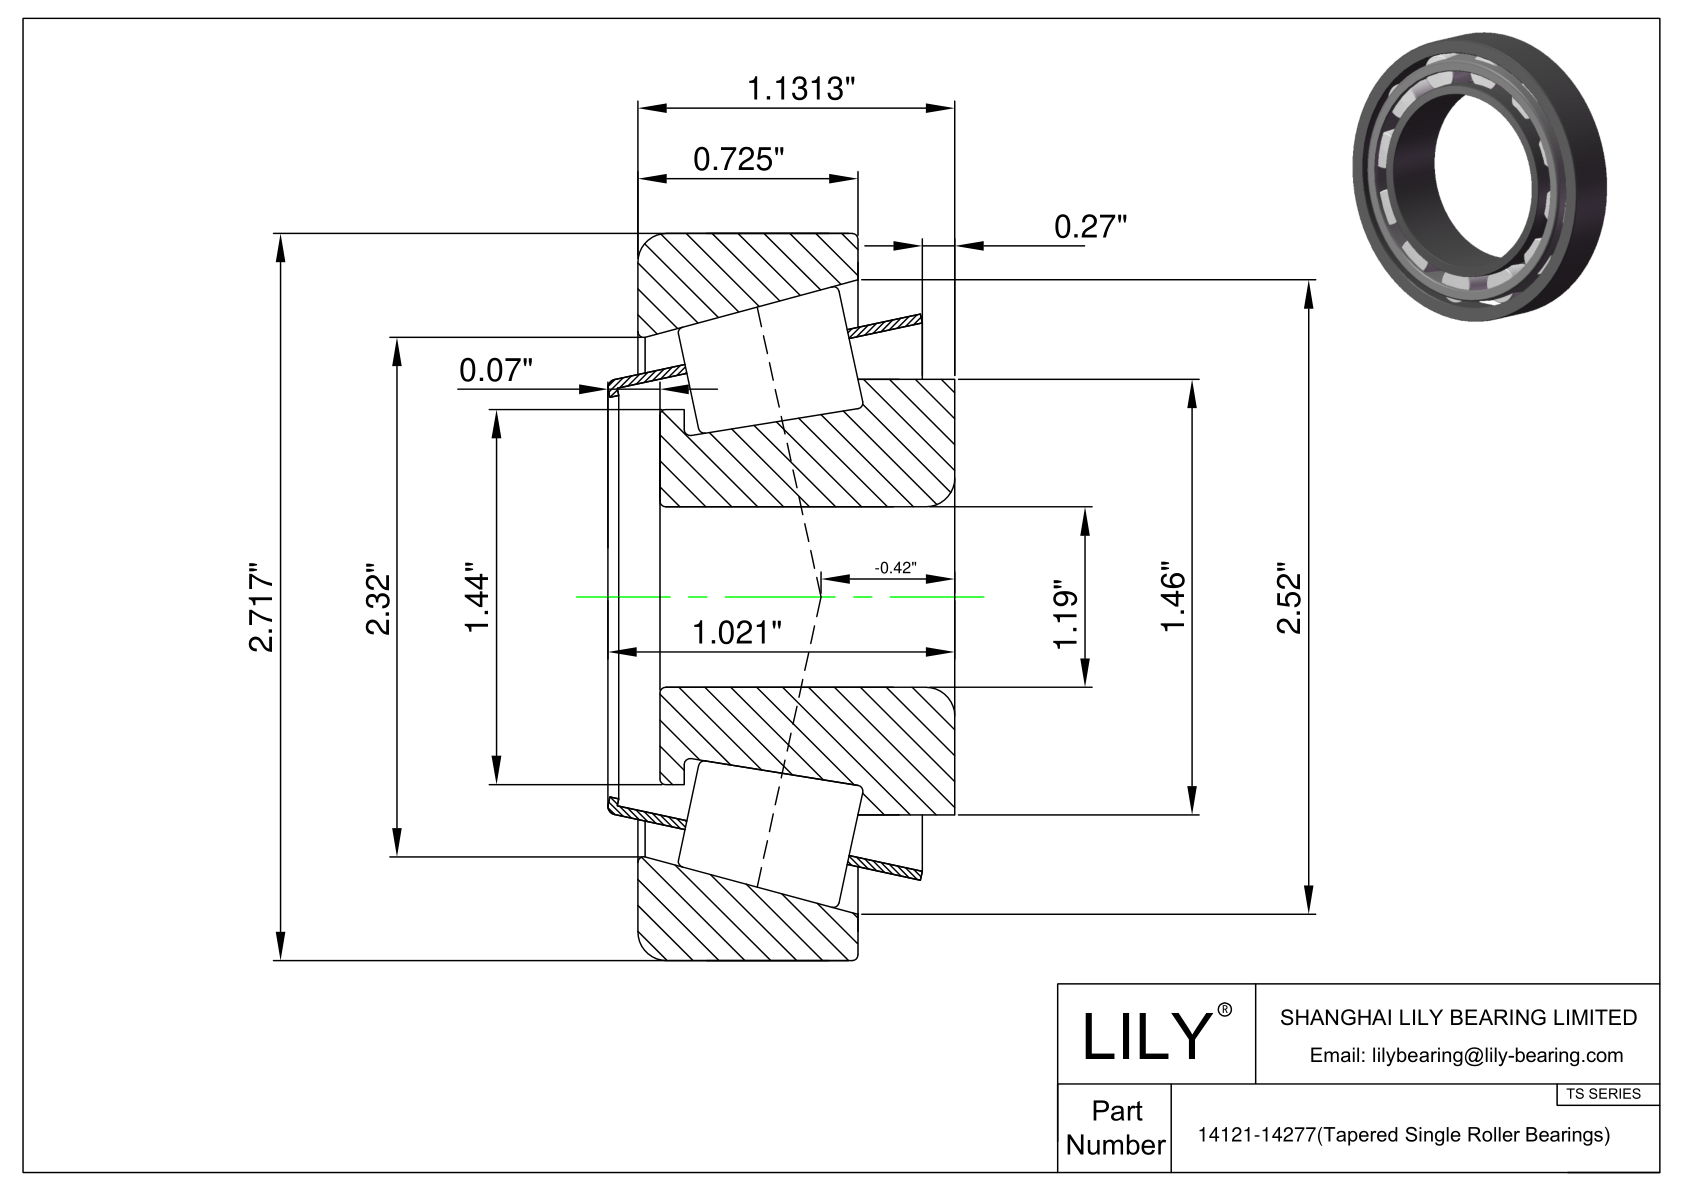 14121-14277 TS (Tapered Single Roller Bearings) (Imperial) cad drawing